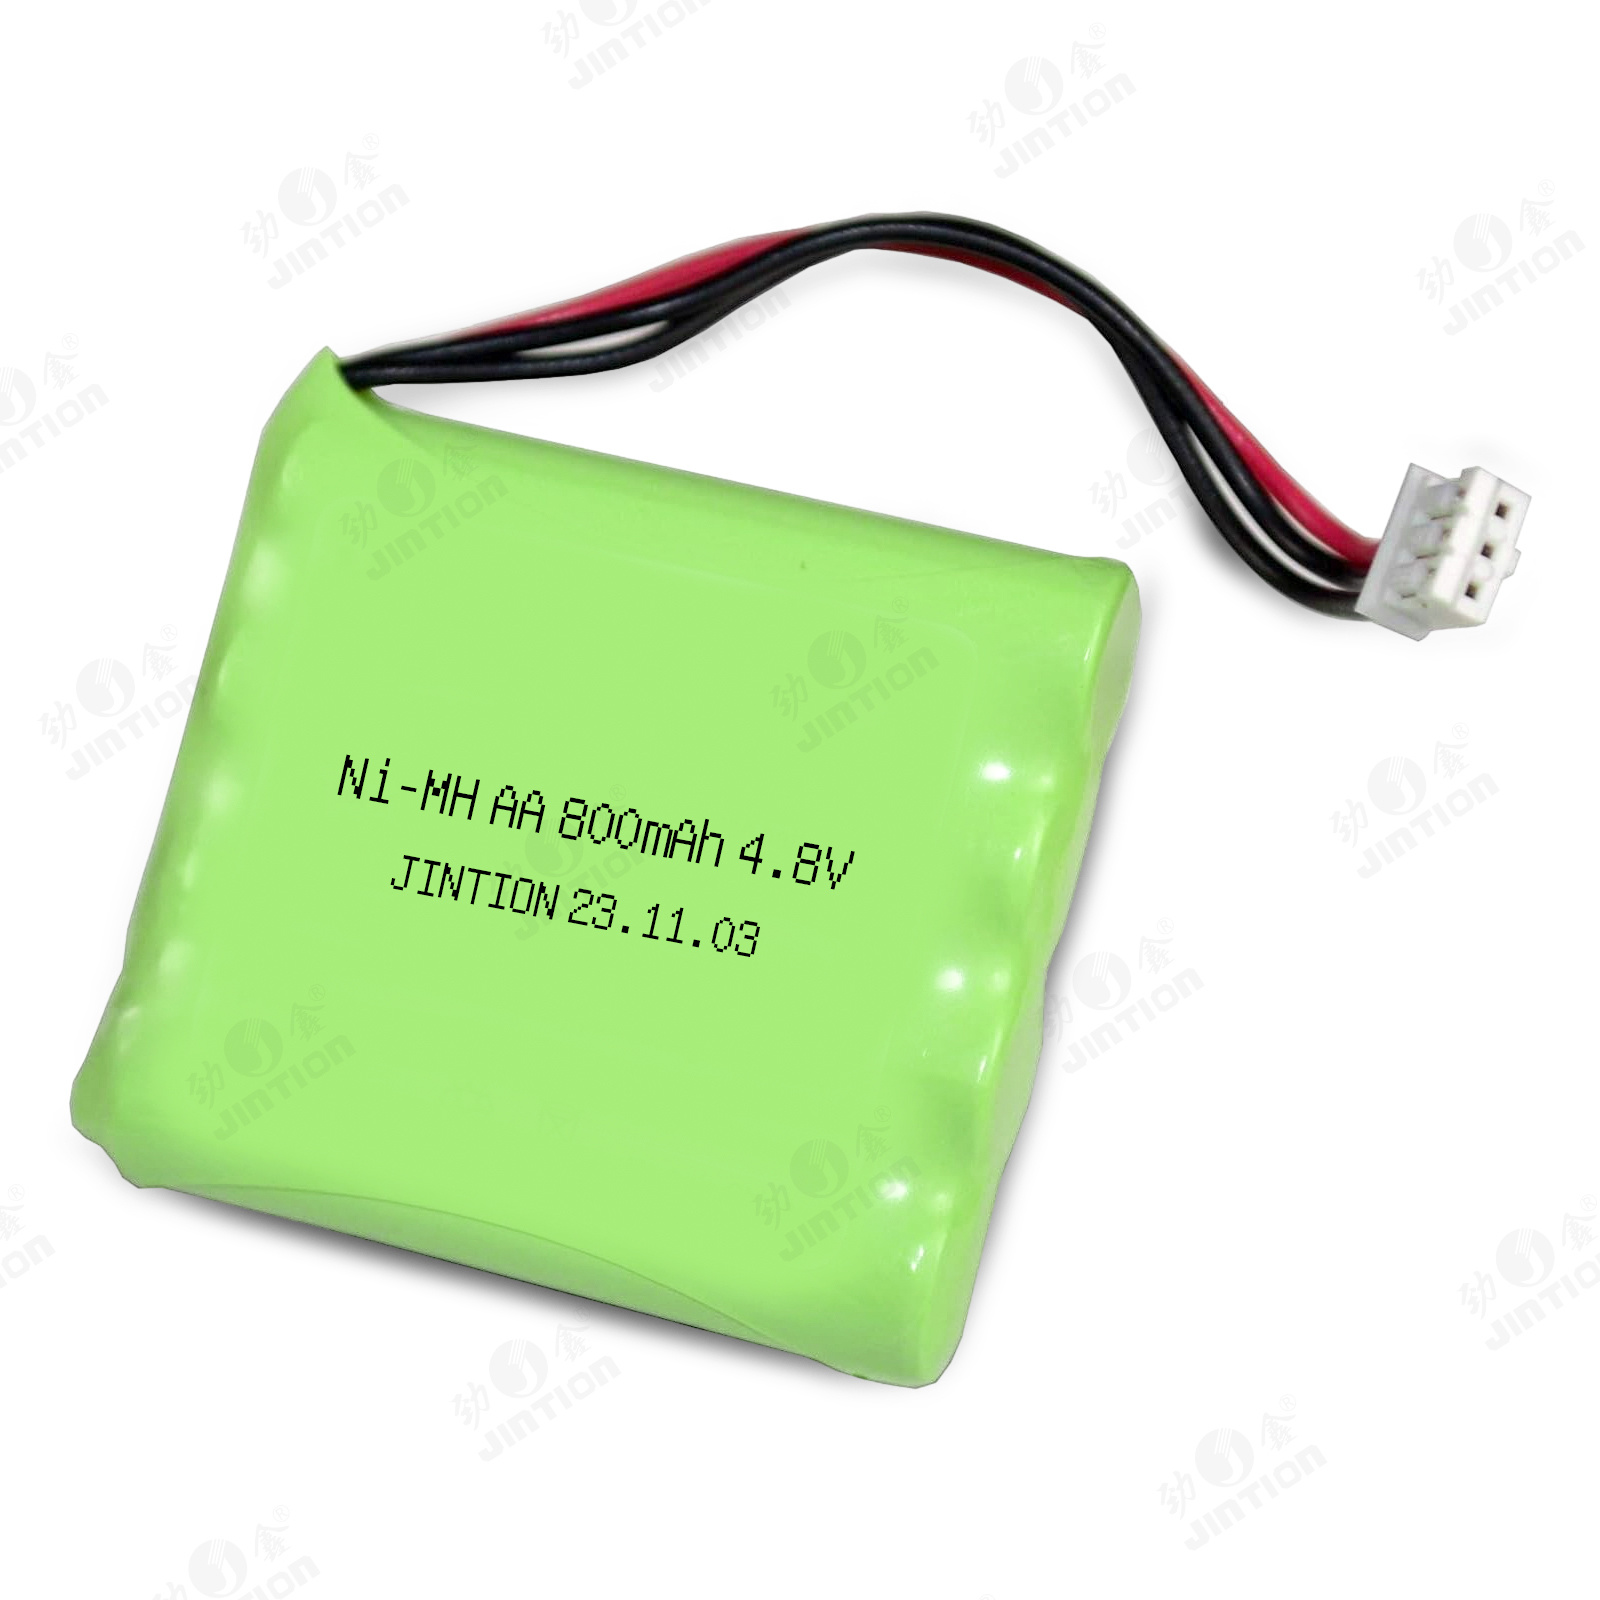 OEM NIMH AA 800mah 4.8v battery pack nimh rechargeable battery for Philips Pronto TSU3000 3500 6000 7000 7500 Remote Control